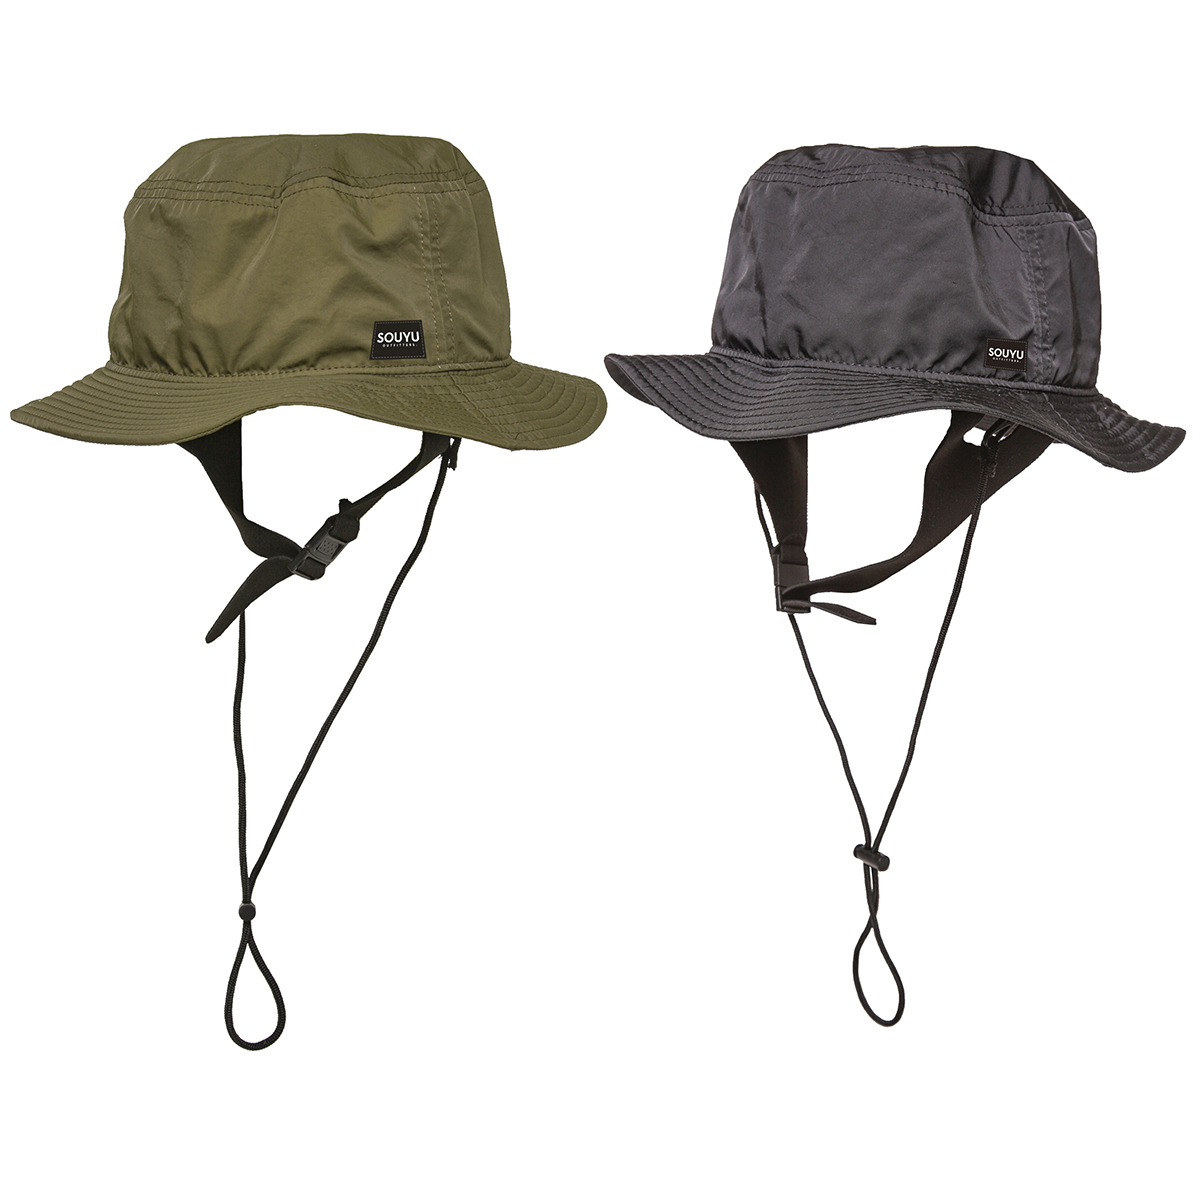 ADVENTURE HAT アドベンチャーハット Number : s20-so-13 Fabric : Polyester 100% Size : FREE Color:Olive,Black Price : ¥5,800